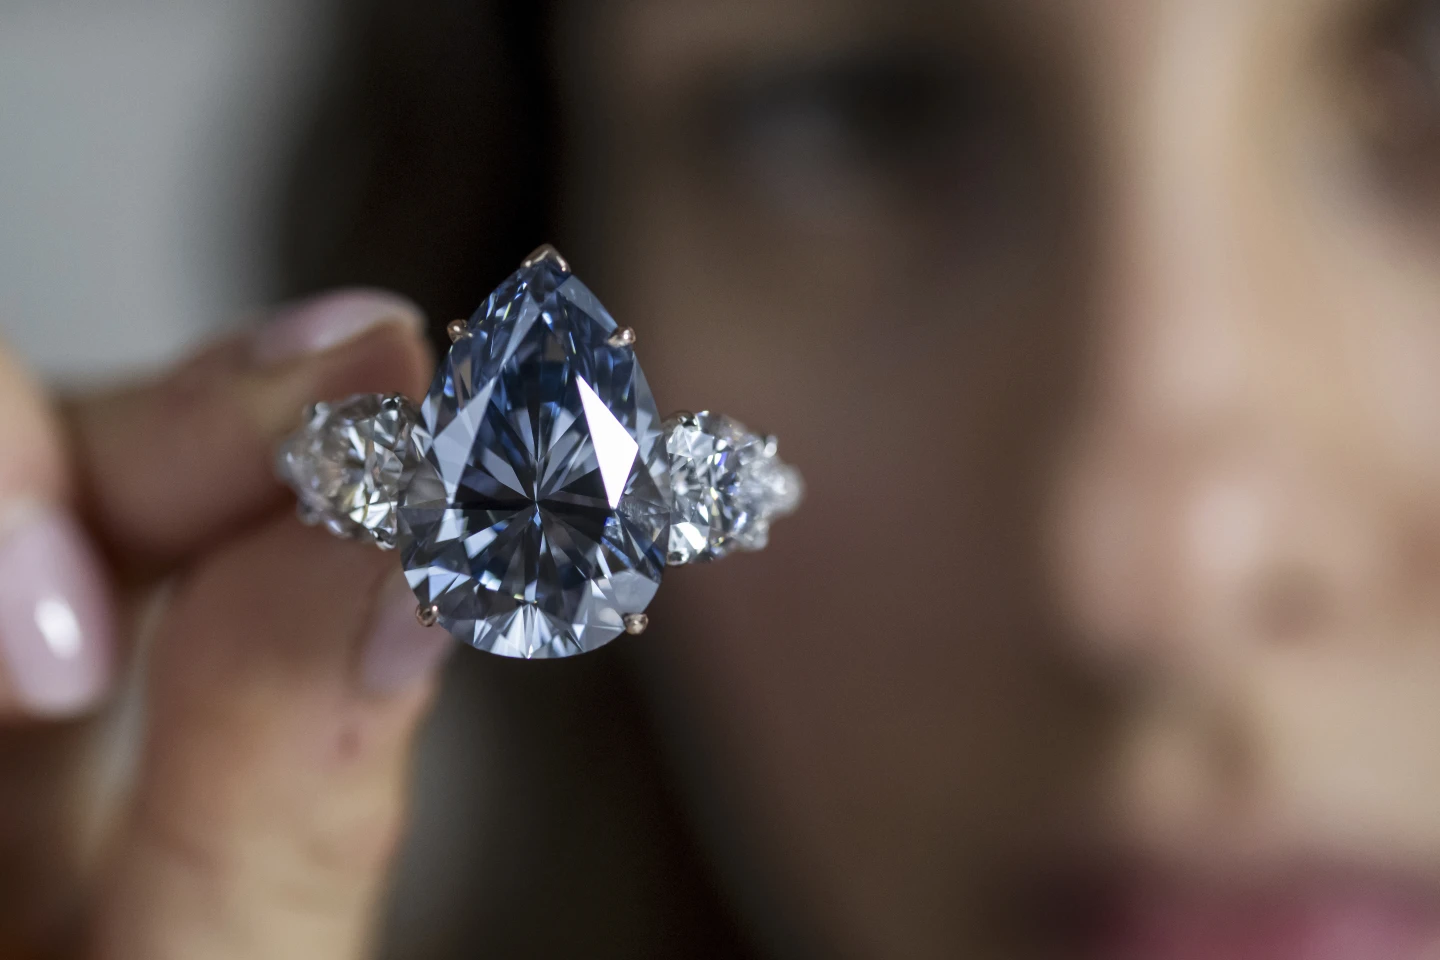 Blue diamond sells for more than $44 million at Christie’s auction in Geneva ?url=https%3A%2F%2Fassets.apnews